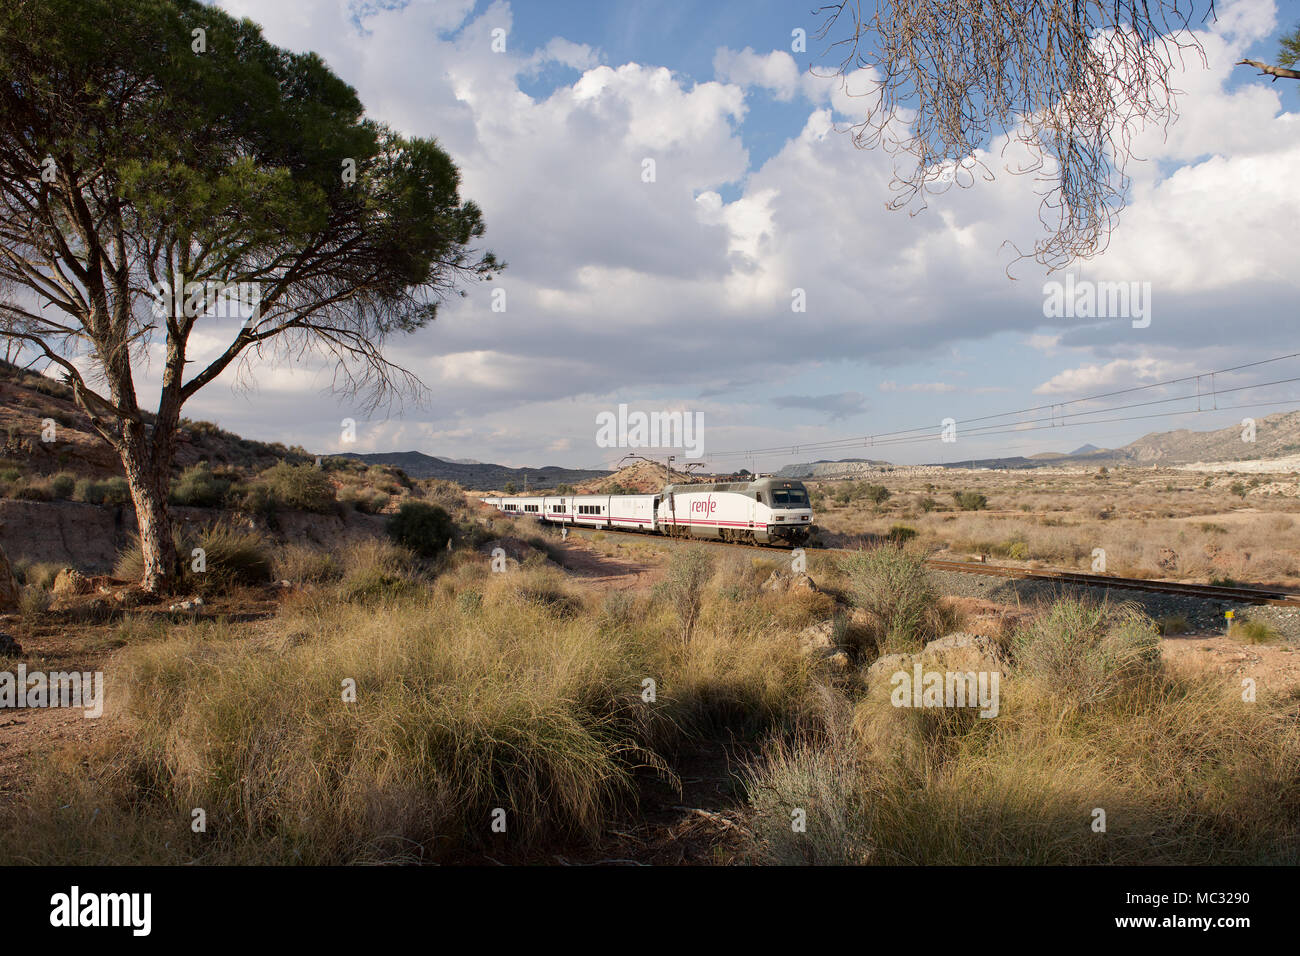 Renfe passenger train in the countryside of Spain Stock Photo